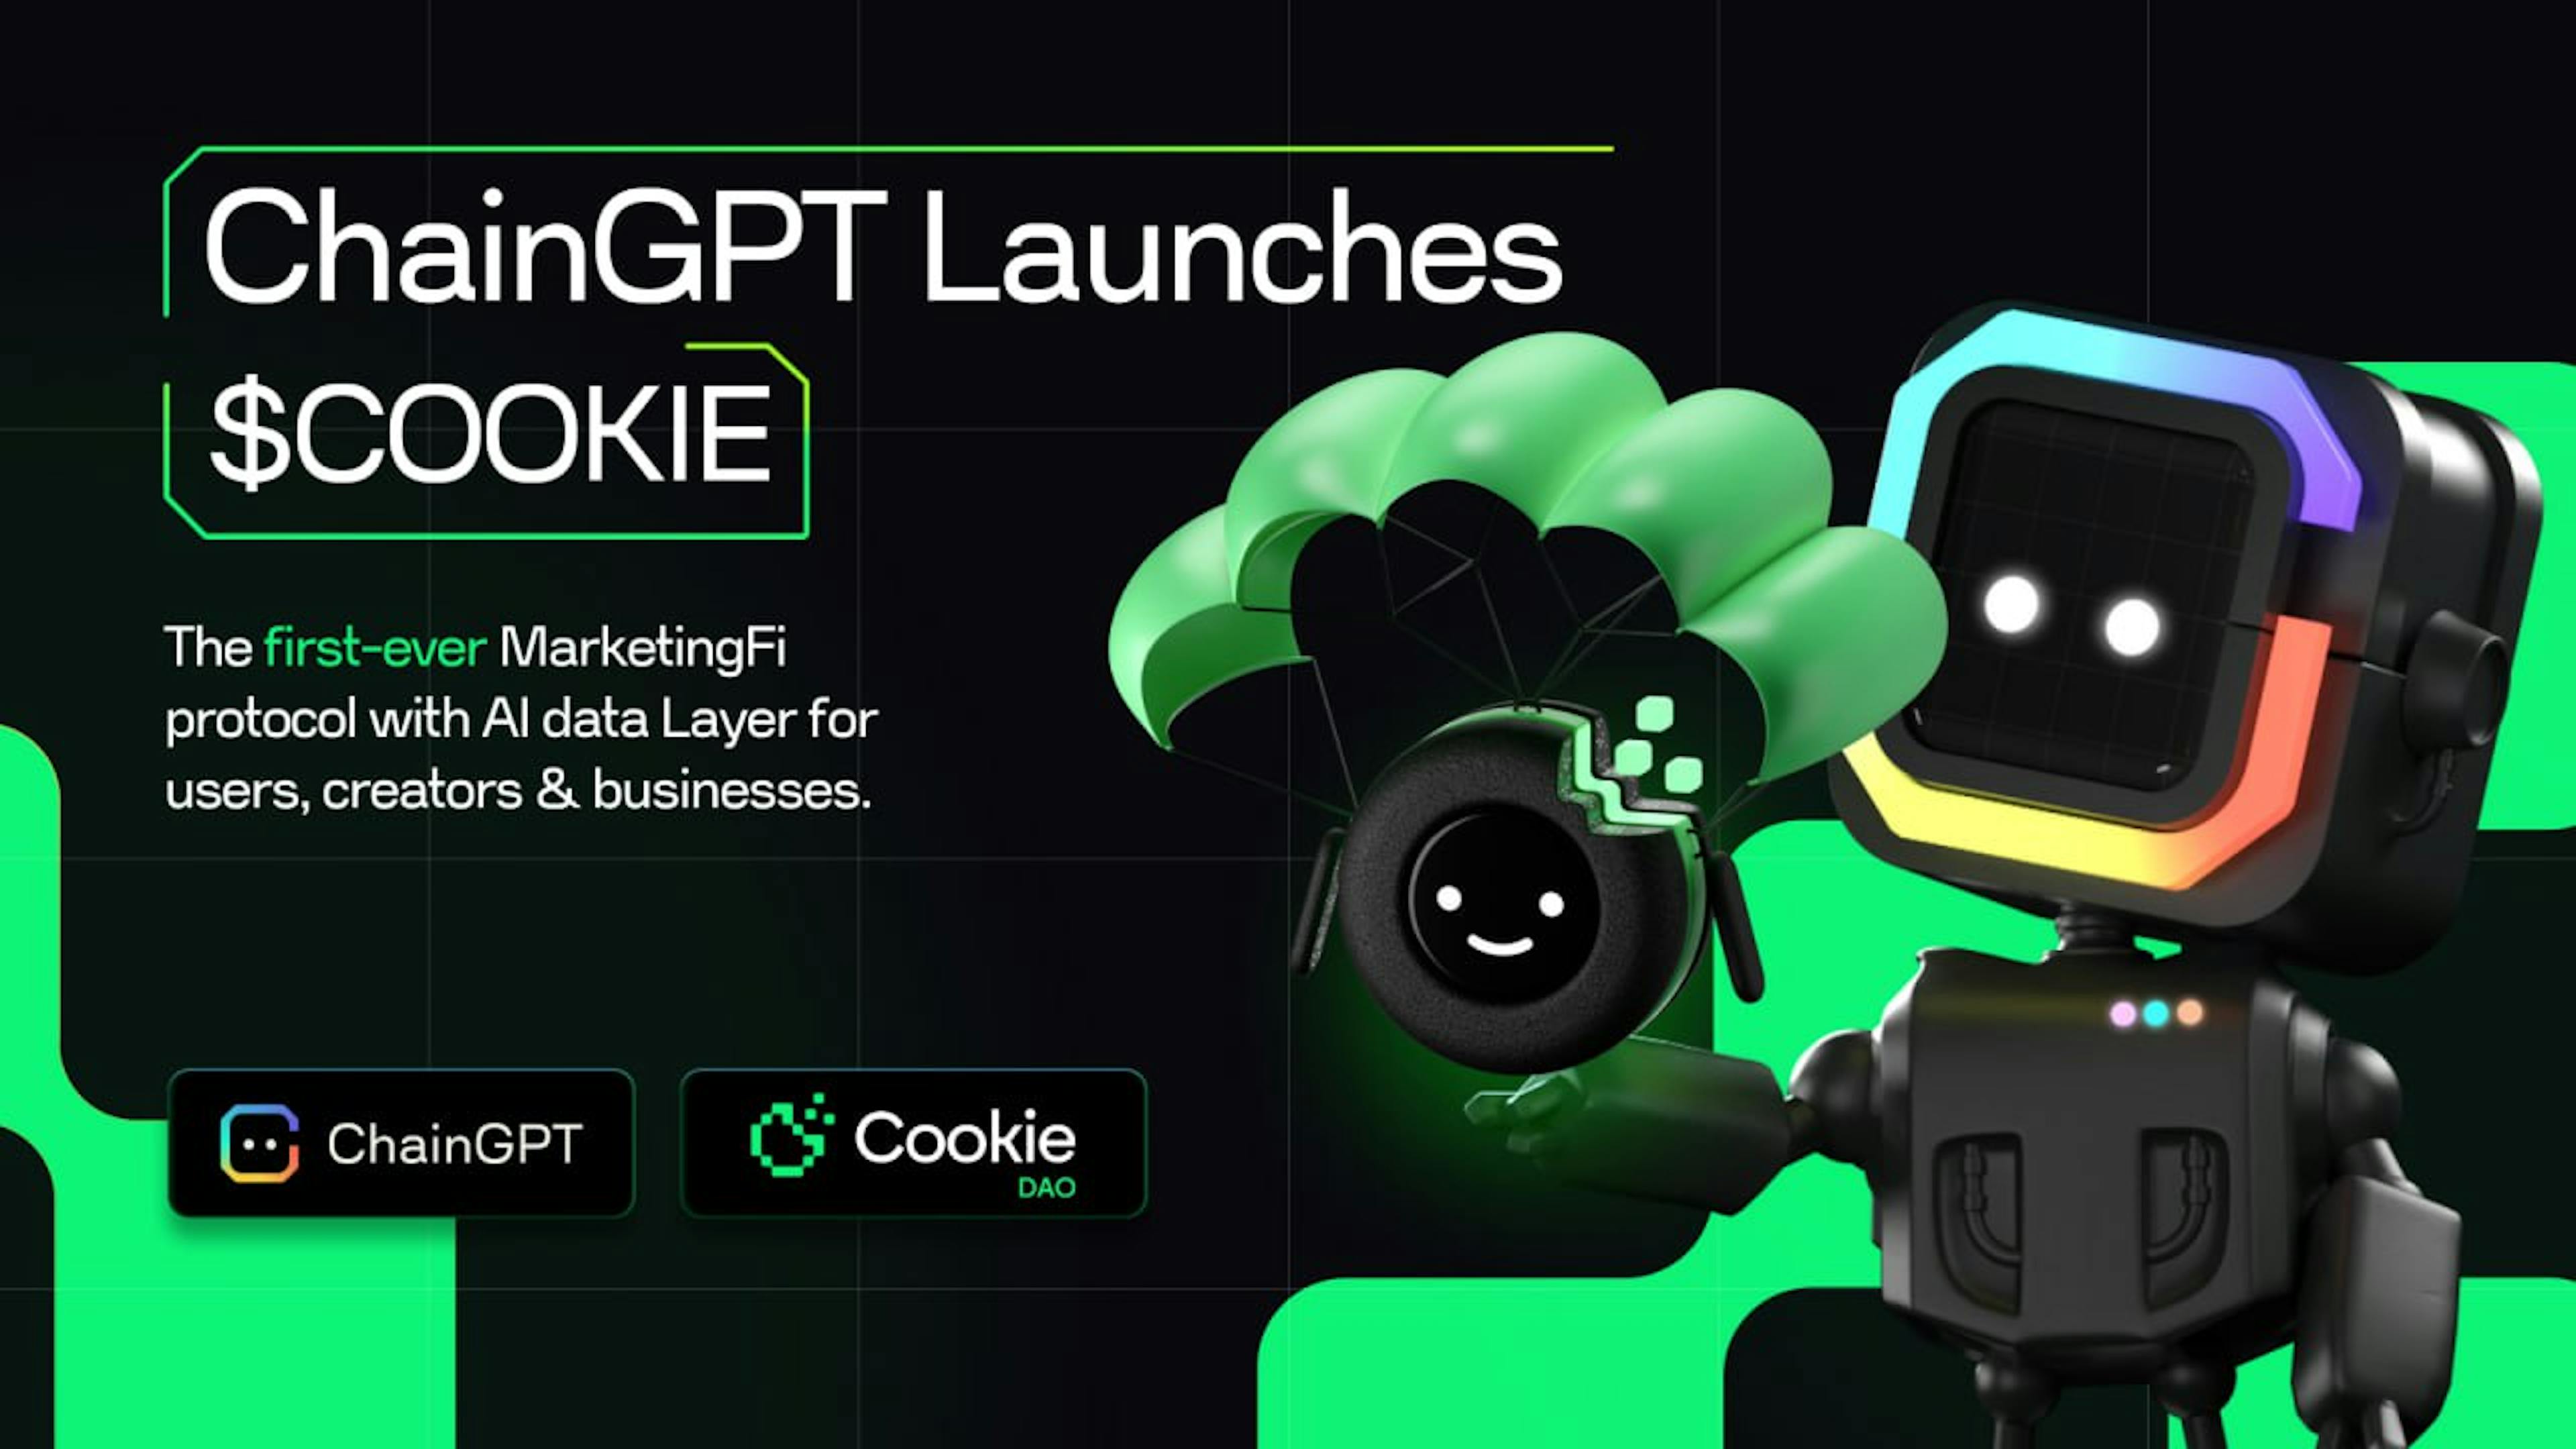 featured image - ChainGPT Pad Launches $COOKIE To Introduce MarketingFi